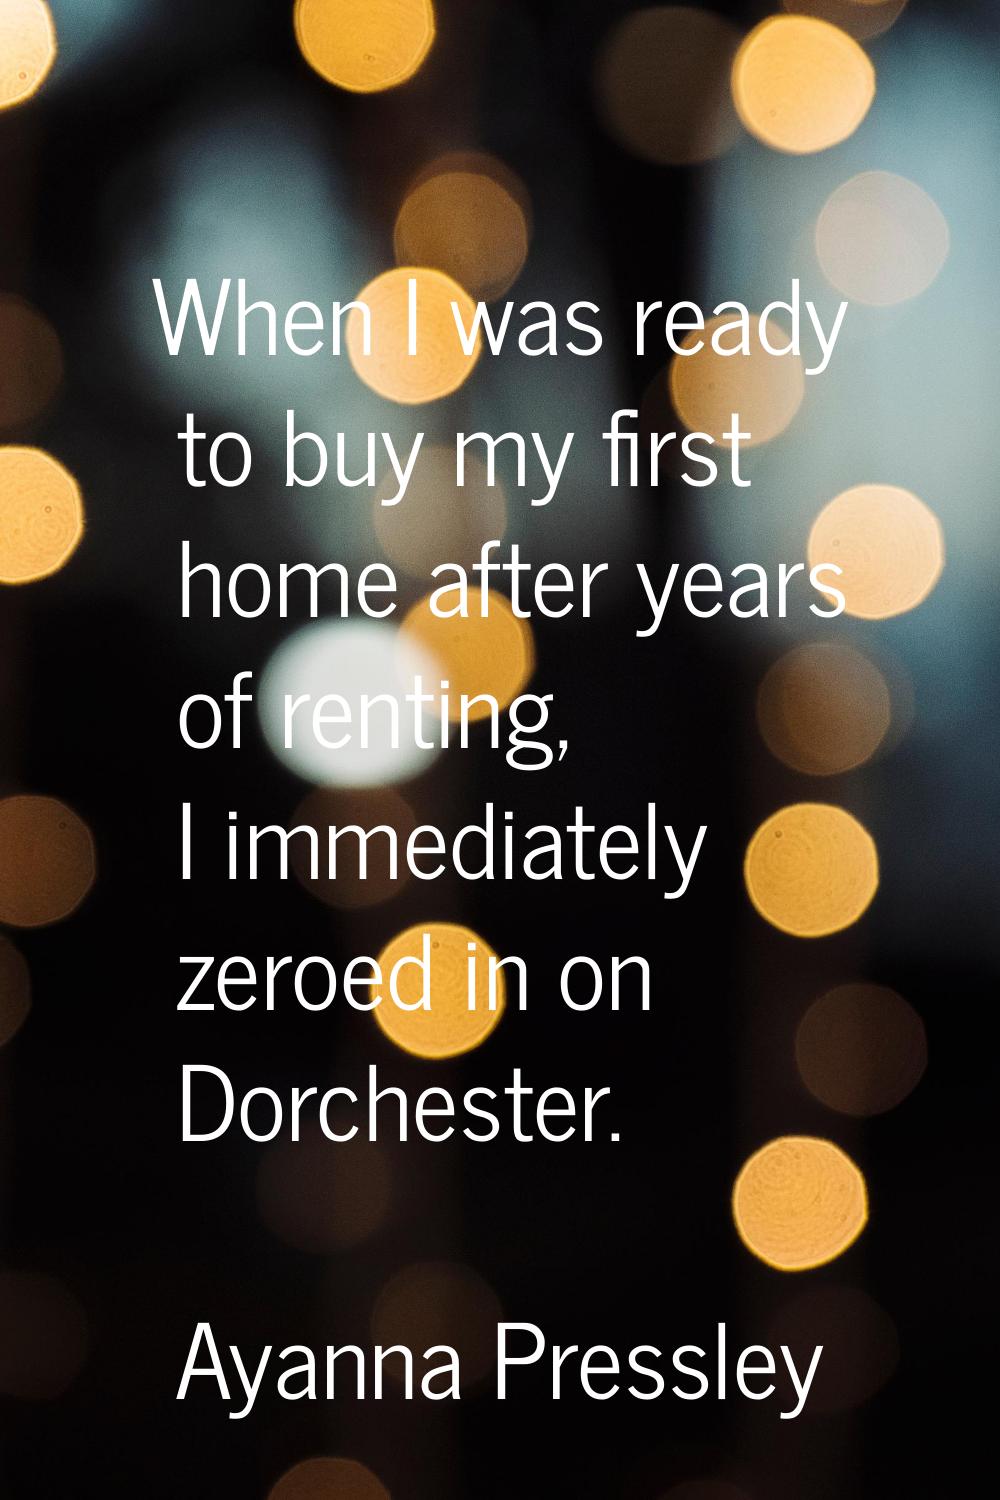 When I was ready to buy my first home after years of renting, I immediately zeroed in on Dorchester